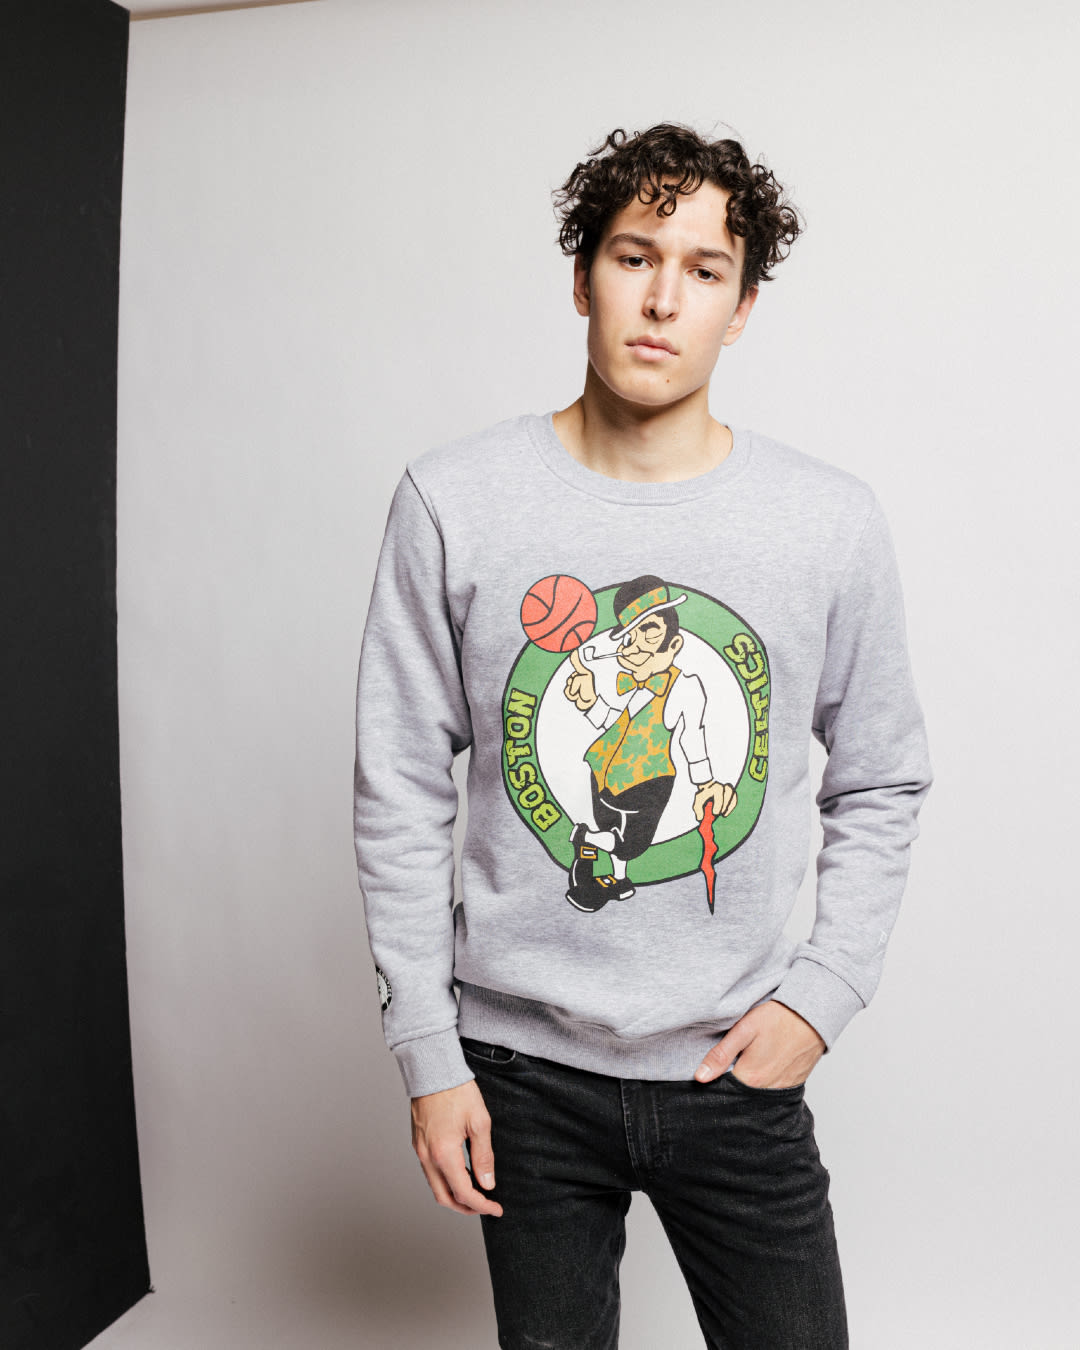 Model wearing a grey crewneck with the Boston Celtics logo in green tmnt font